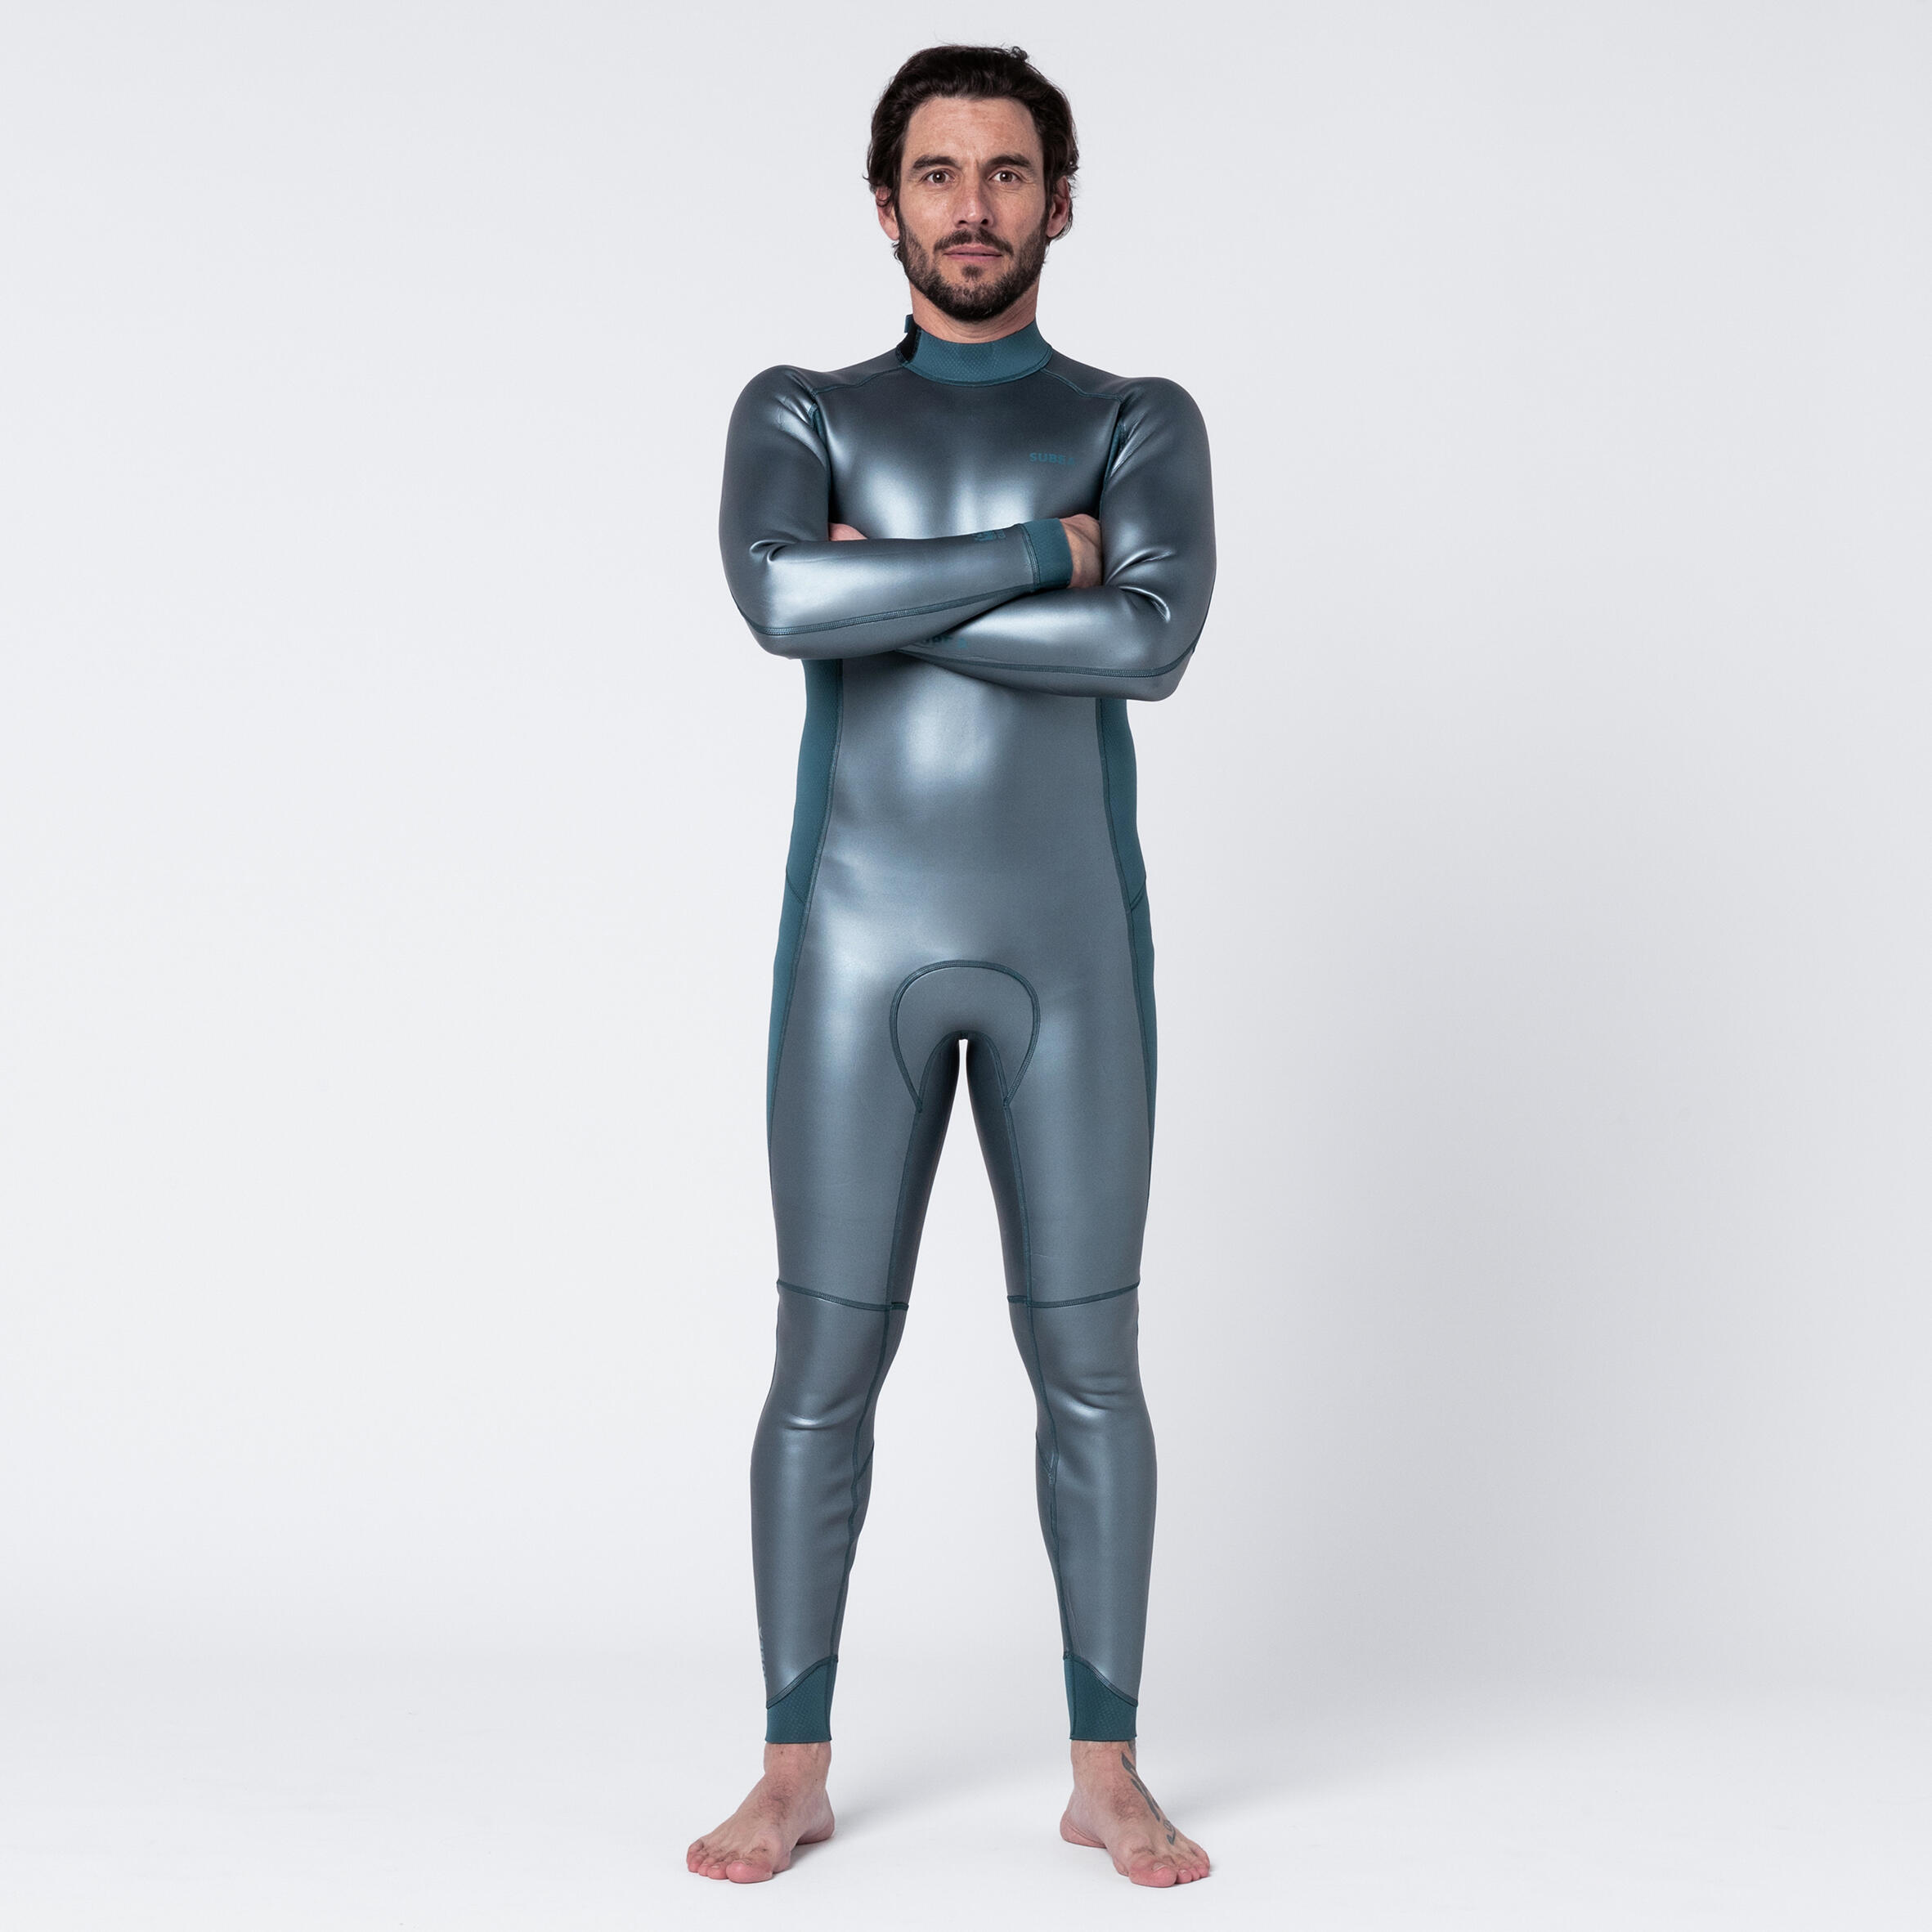 SUBEA Men's Dynamic Free-diving 1.5 mm Neoprene Wetsuit SUBEA FRD